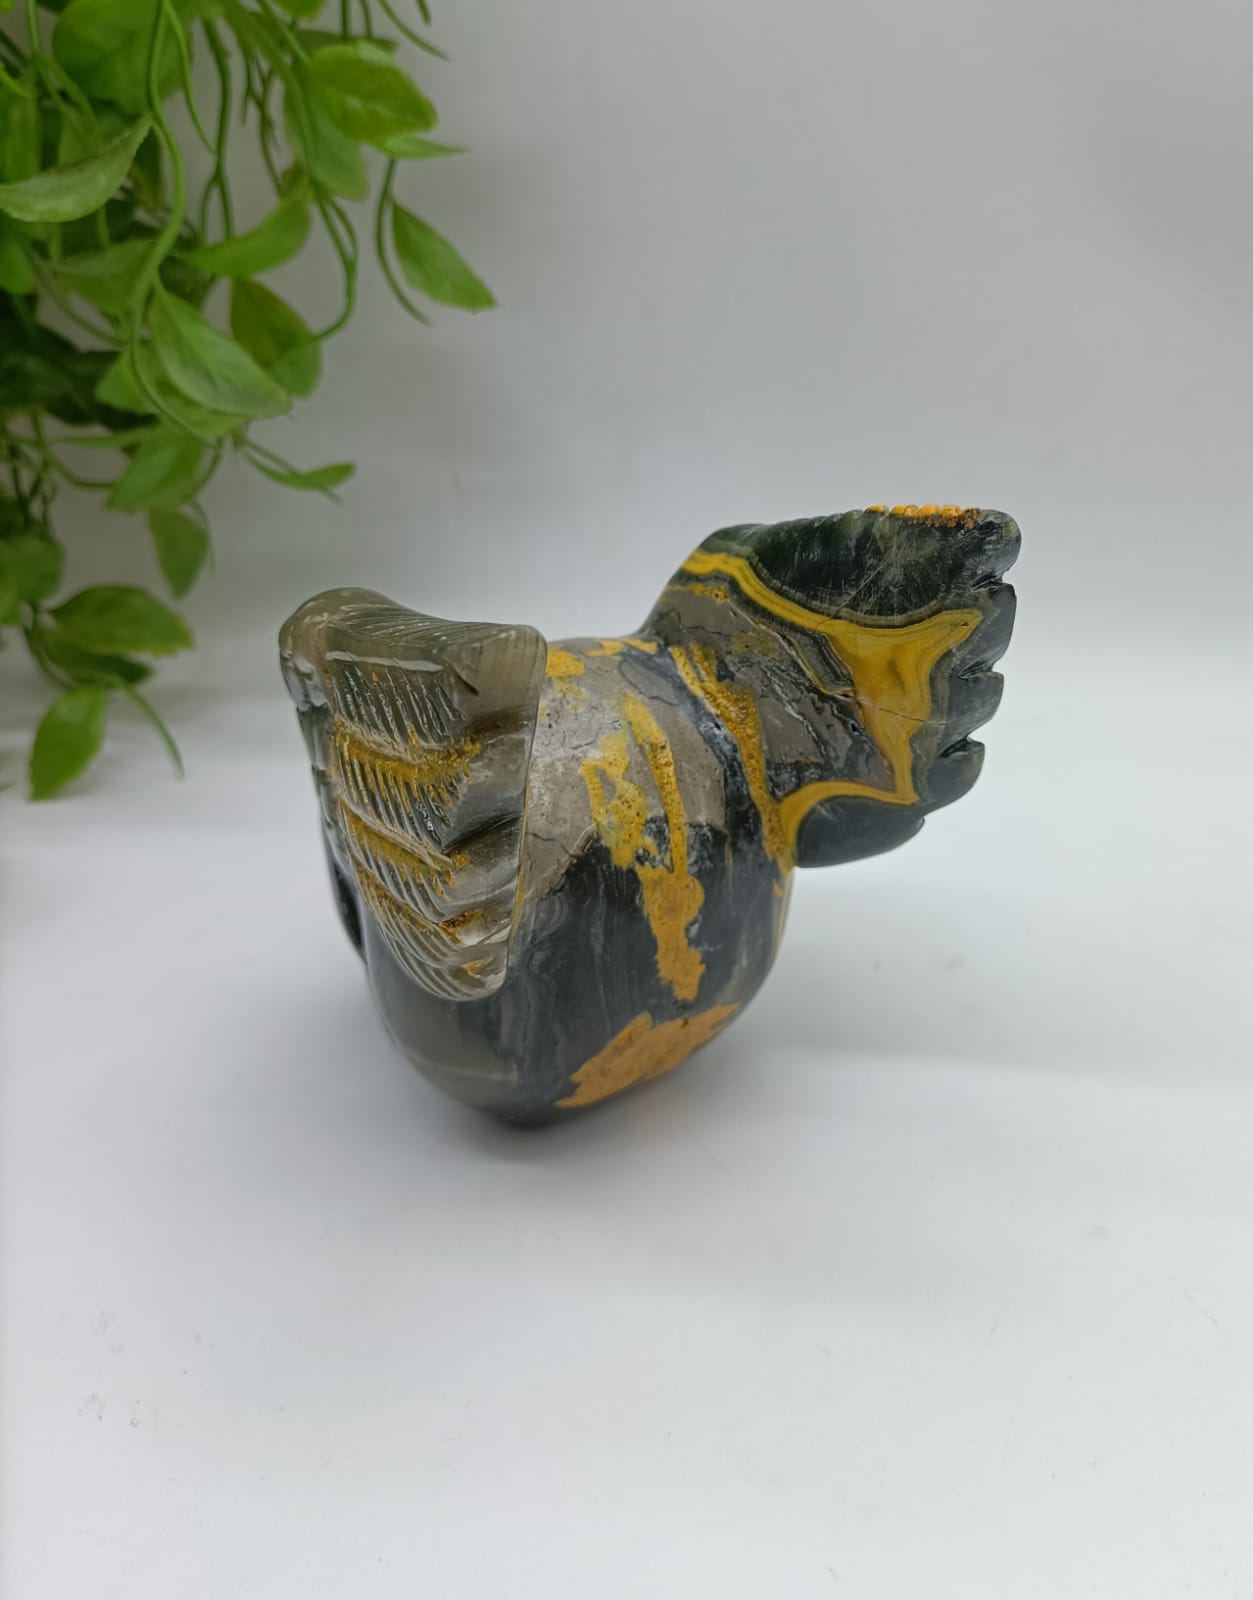 Bumblebee Jasper Skull with Wings 778g (Special 30% OFF)

